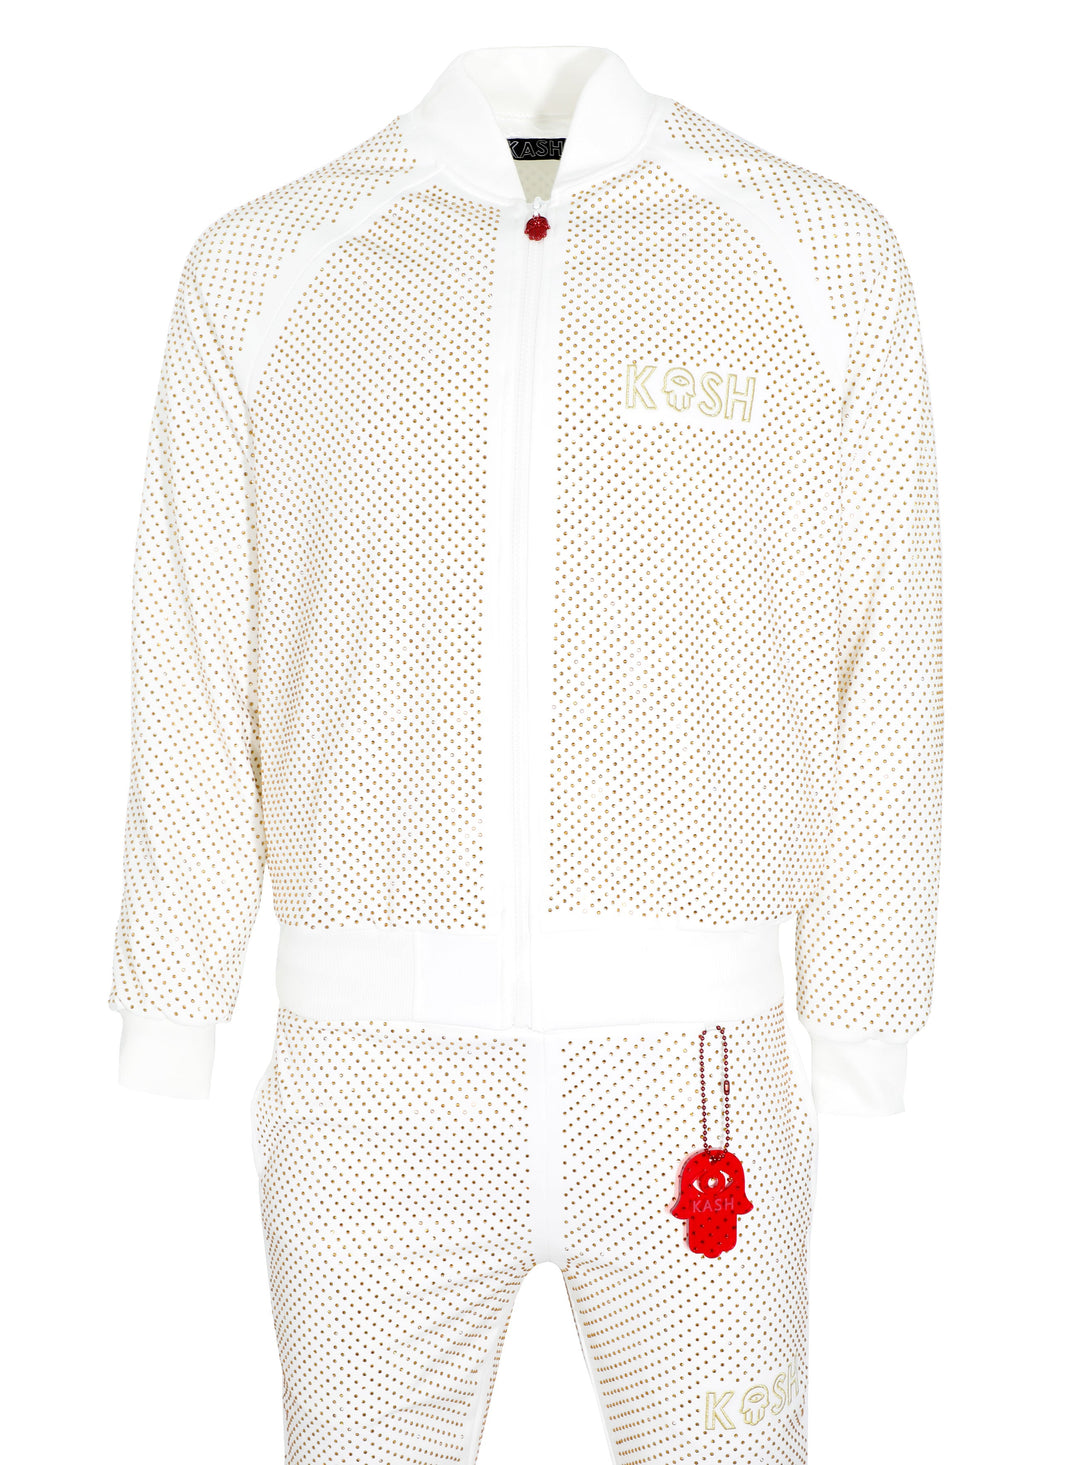 Kash Crystal Track Jacket with Hamso Logo 2.0 Long Sleeve Zip Closure Color: White and Gold Crystals 100% Polyester Wrinkle Free Material Fits true to size